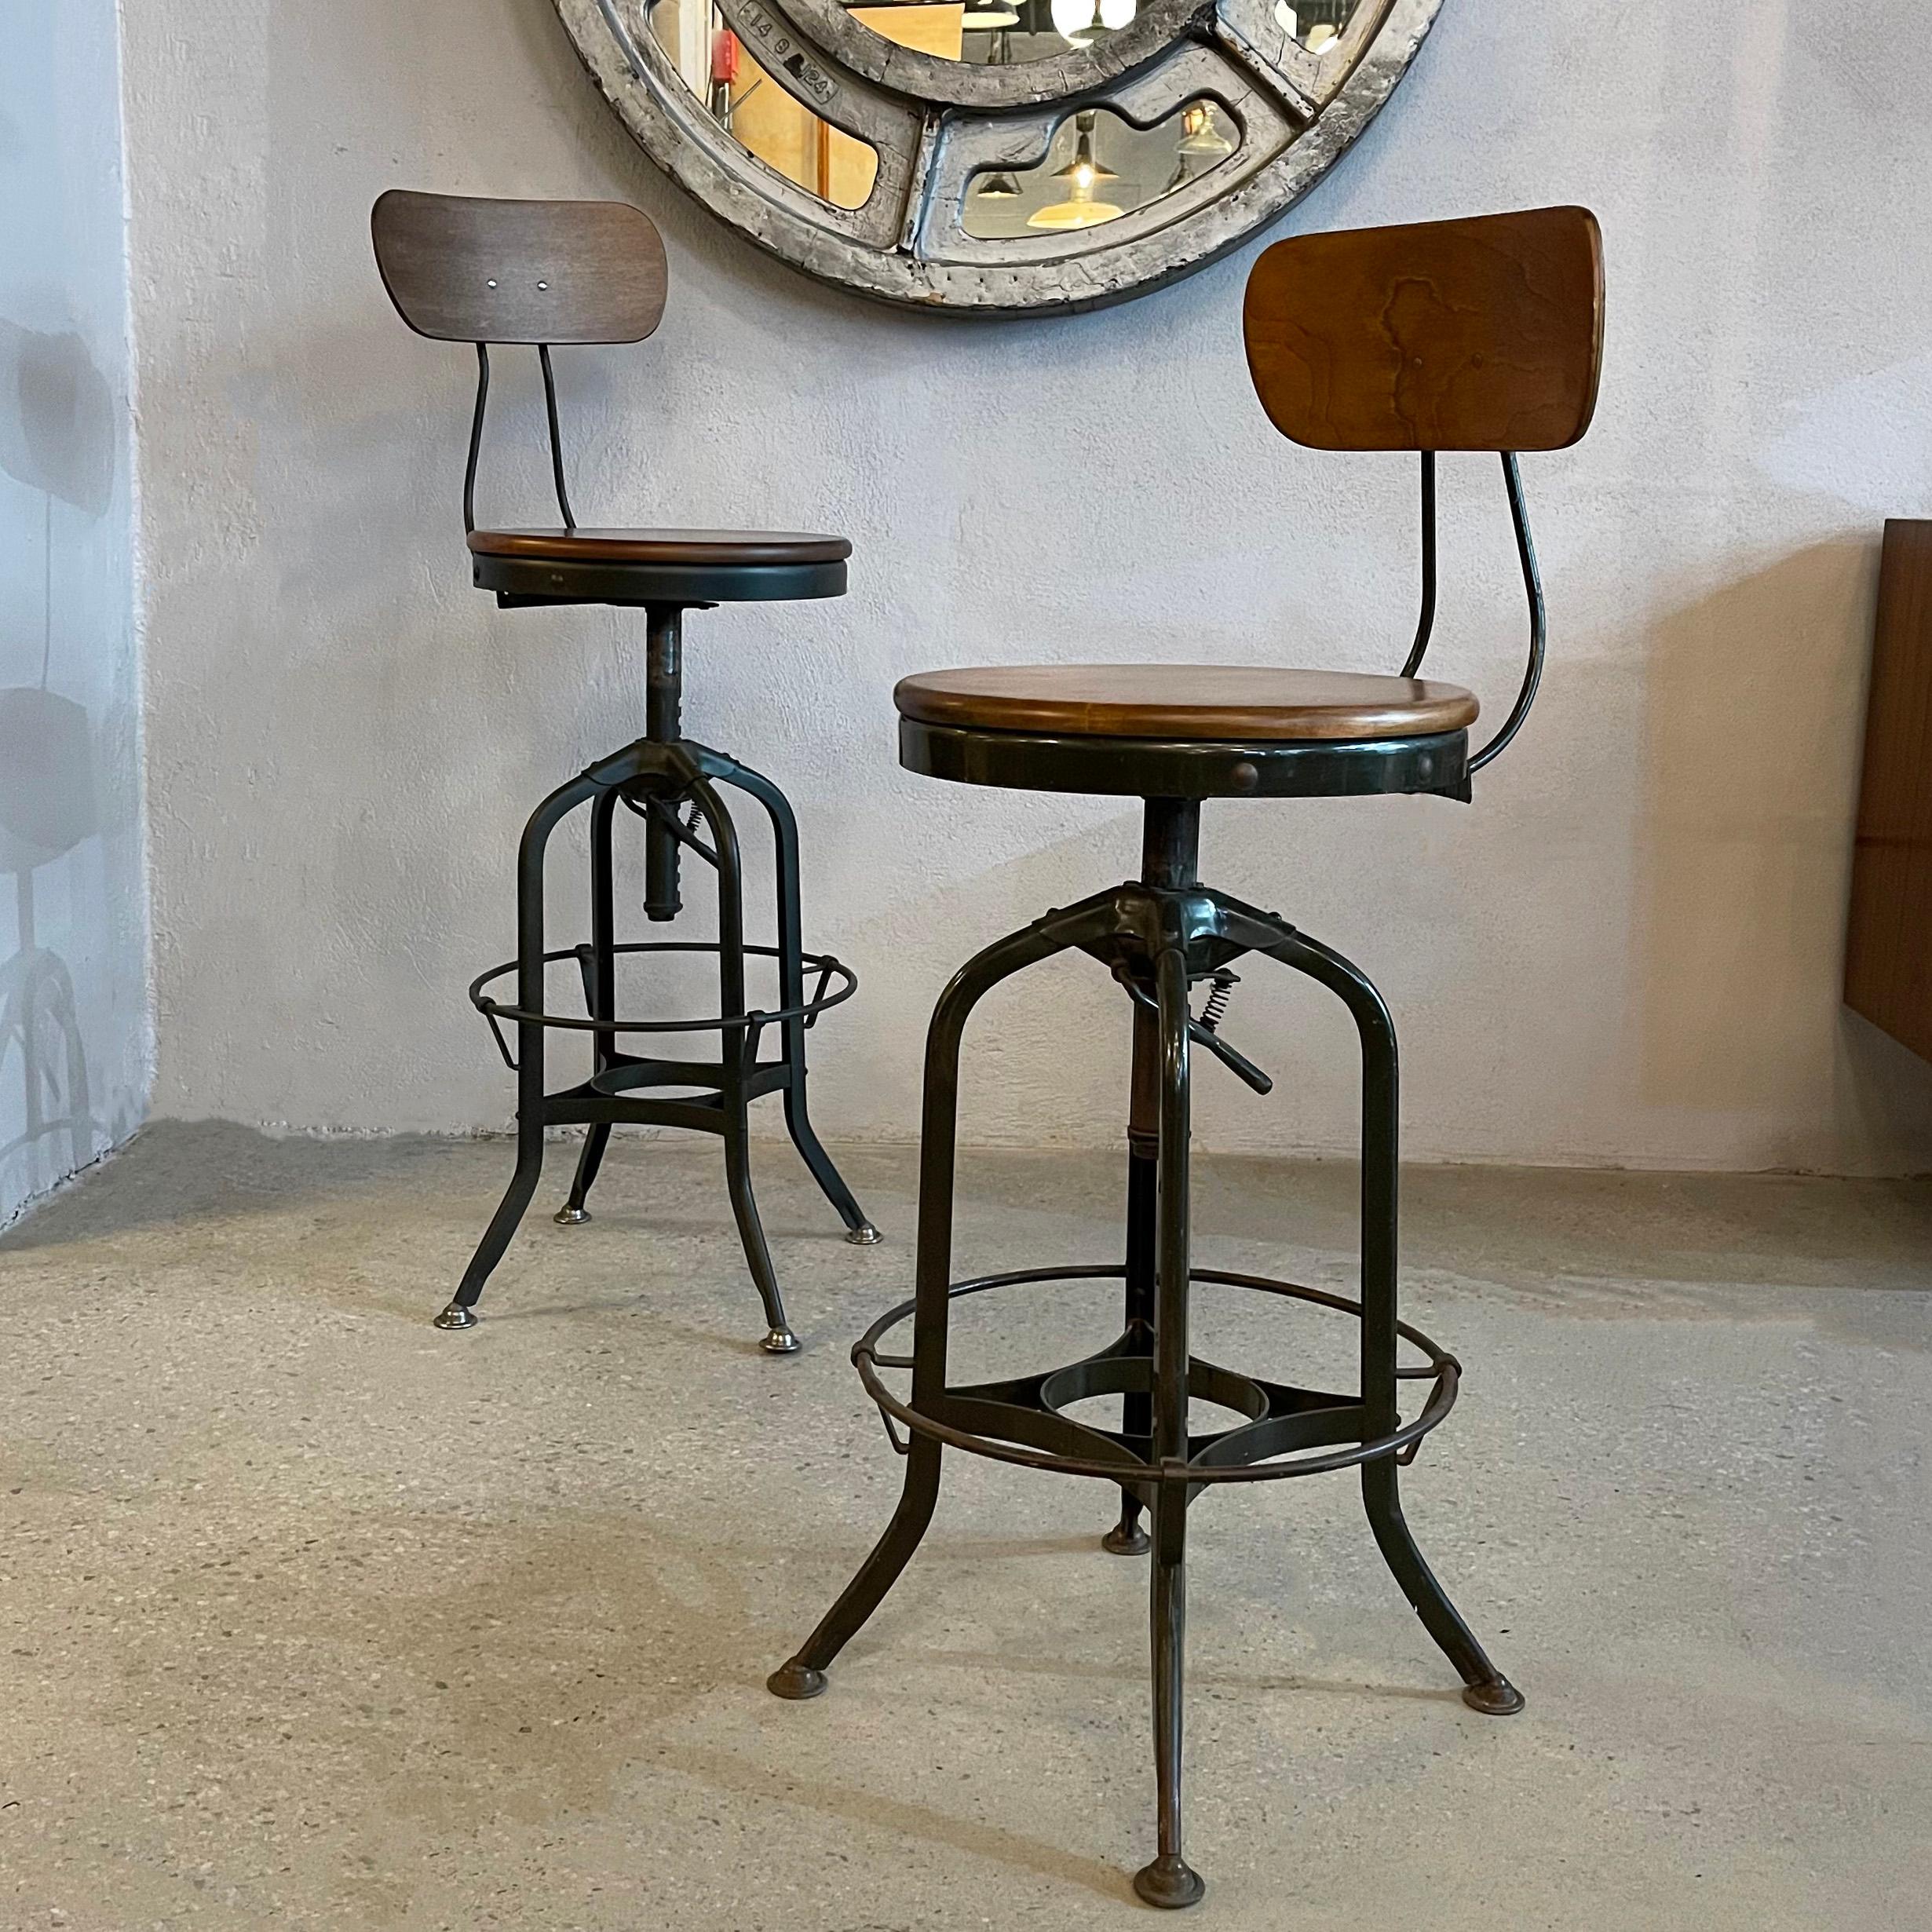 Pair of industrial, swivel, drafting stools by Toledo Metal Furniture Co., circa 1940's feature muted gray green, painted metal frames with maple seats and backs. The stools are height adjustable incrementally from 25 - 33 inches making them